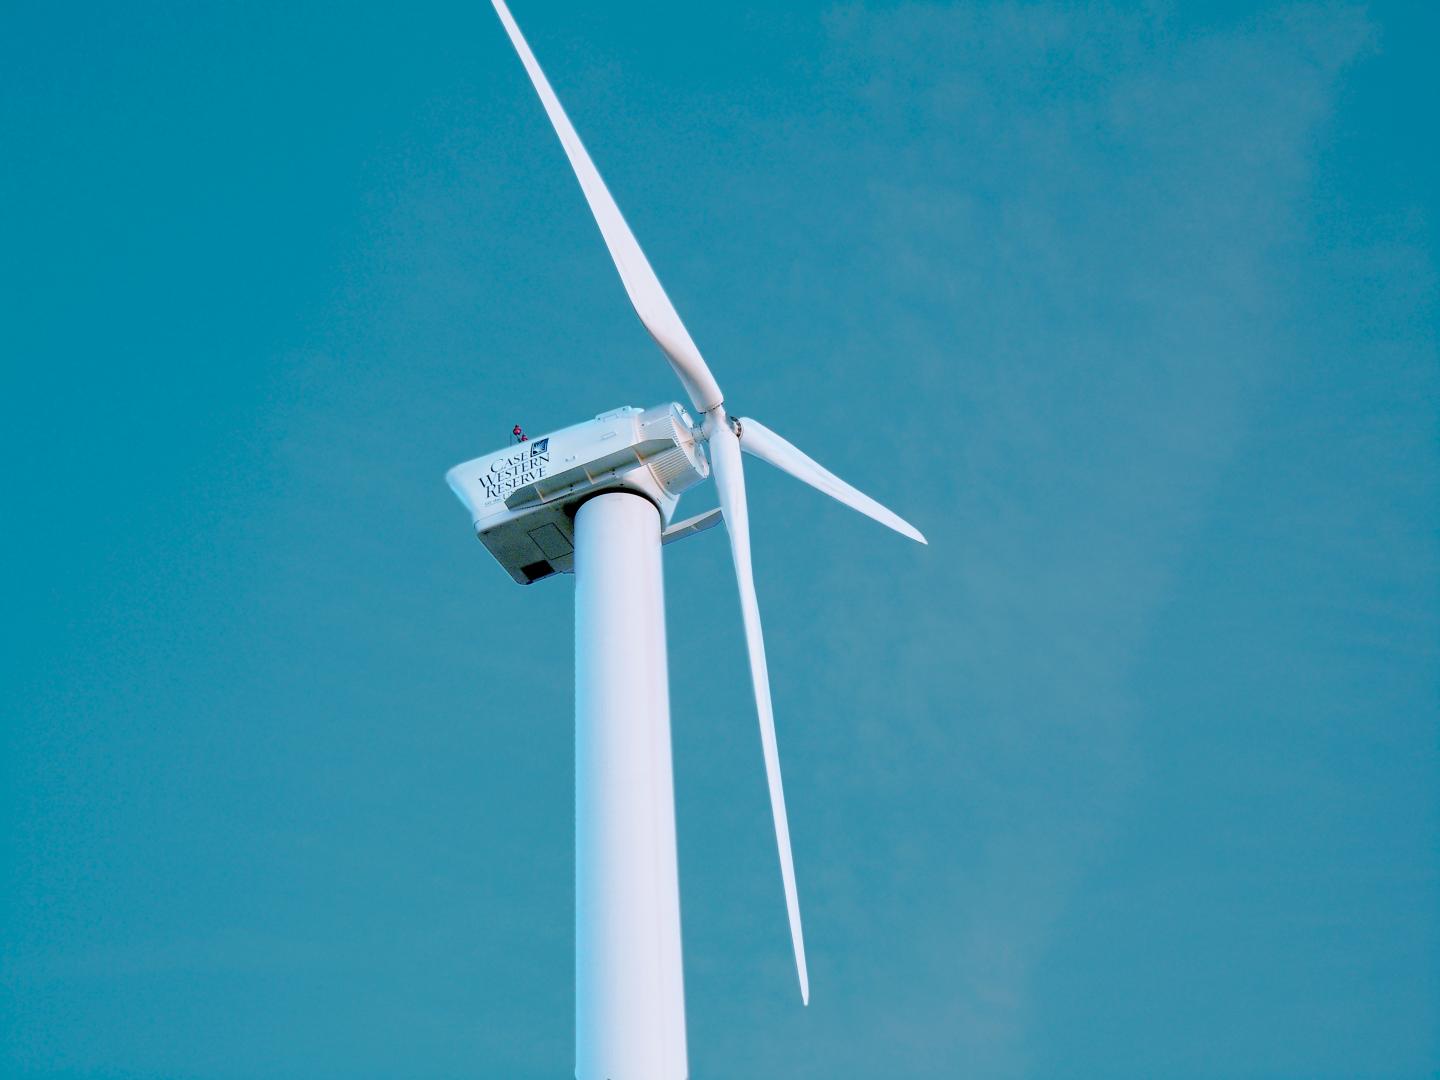 A Wind Turbine at Case Western Reserve University Supplies Power to the Campus